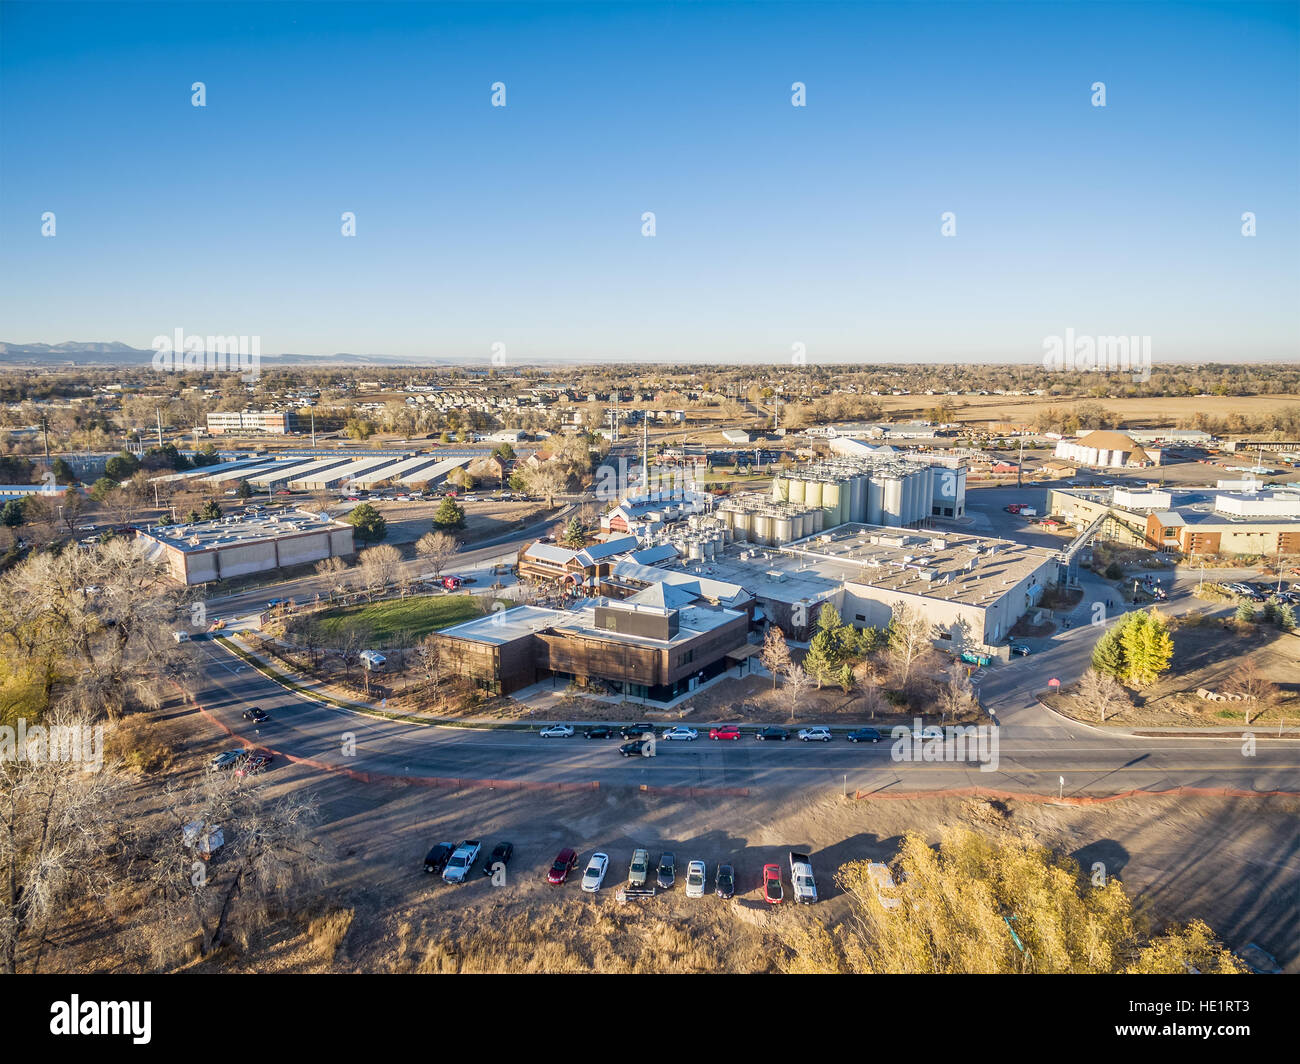 FORT COLLINS, CO, USA - NOVEMBER 12, 2016: Aerial veiw of New Belgium Brewing Company, craft brewery emphasizing  eco-friendly practices and employee  Stock Photo